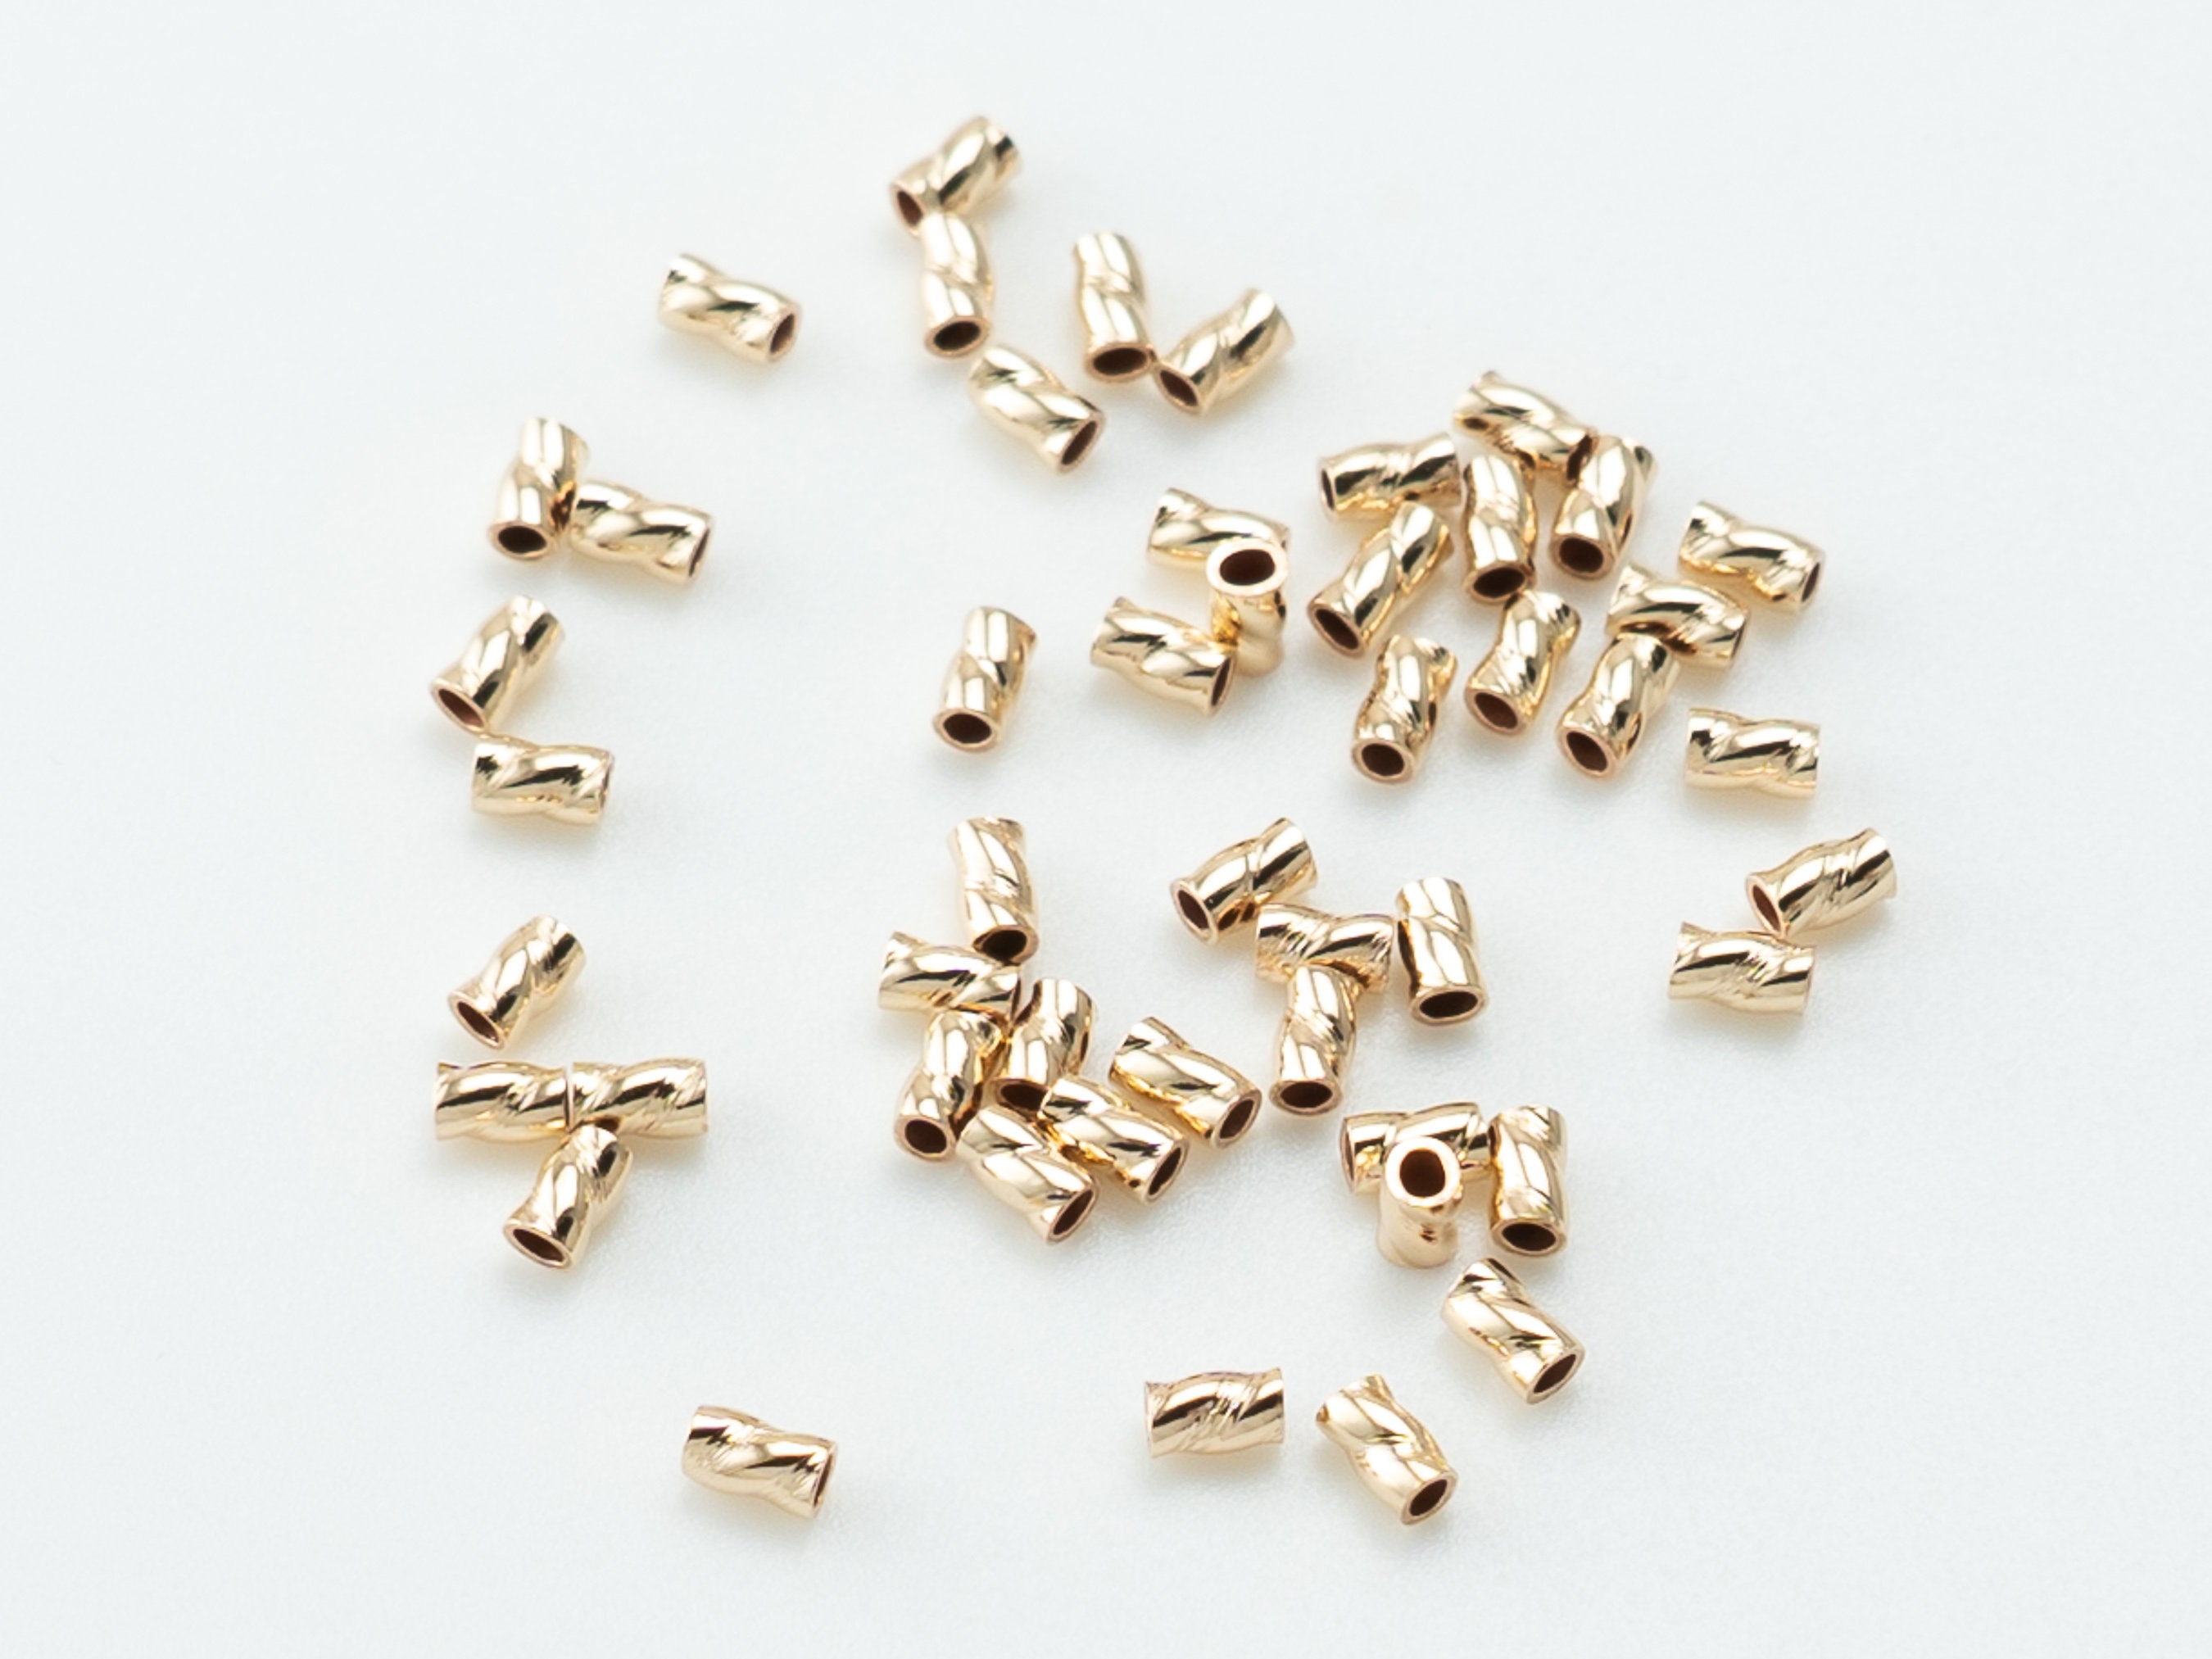 1000 pcs Gold Filled Beads - Gold Filled Seamless Round Spacer Beads, 2mm,  2.5mm, 3mm, 4mm WHOLESALE PRICE - GF beads - Yellow gold filled